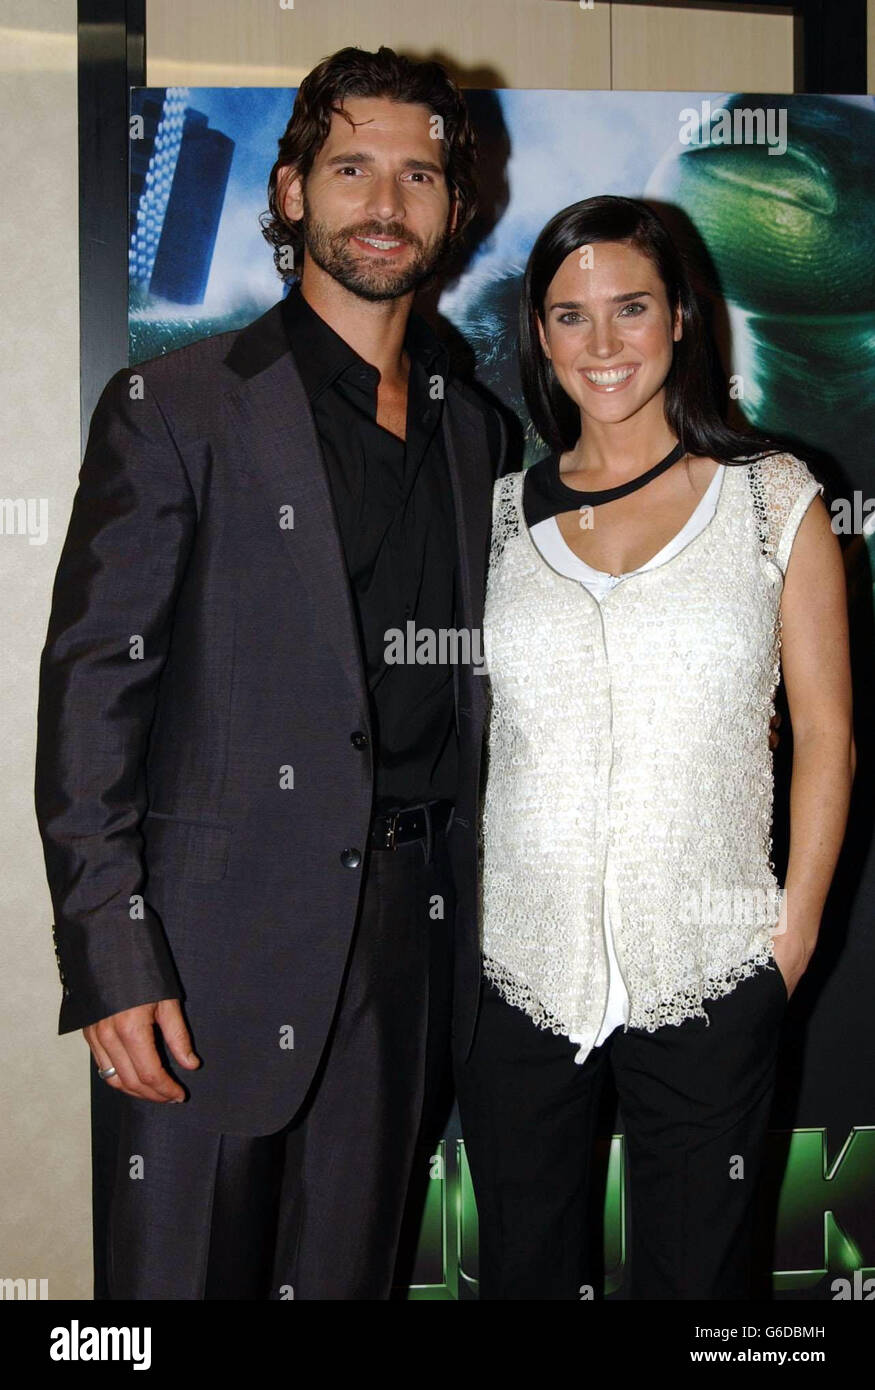 Eric Bana who plays the Hulk and co-star Jennifer Connelly arrive at the premiere of The Hulk at the Empire cinema in London's Leicester Square. Stock Photo